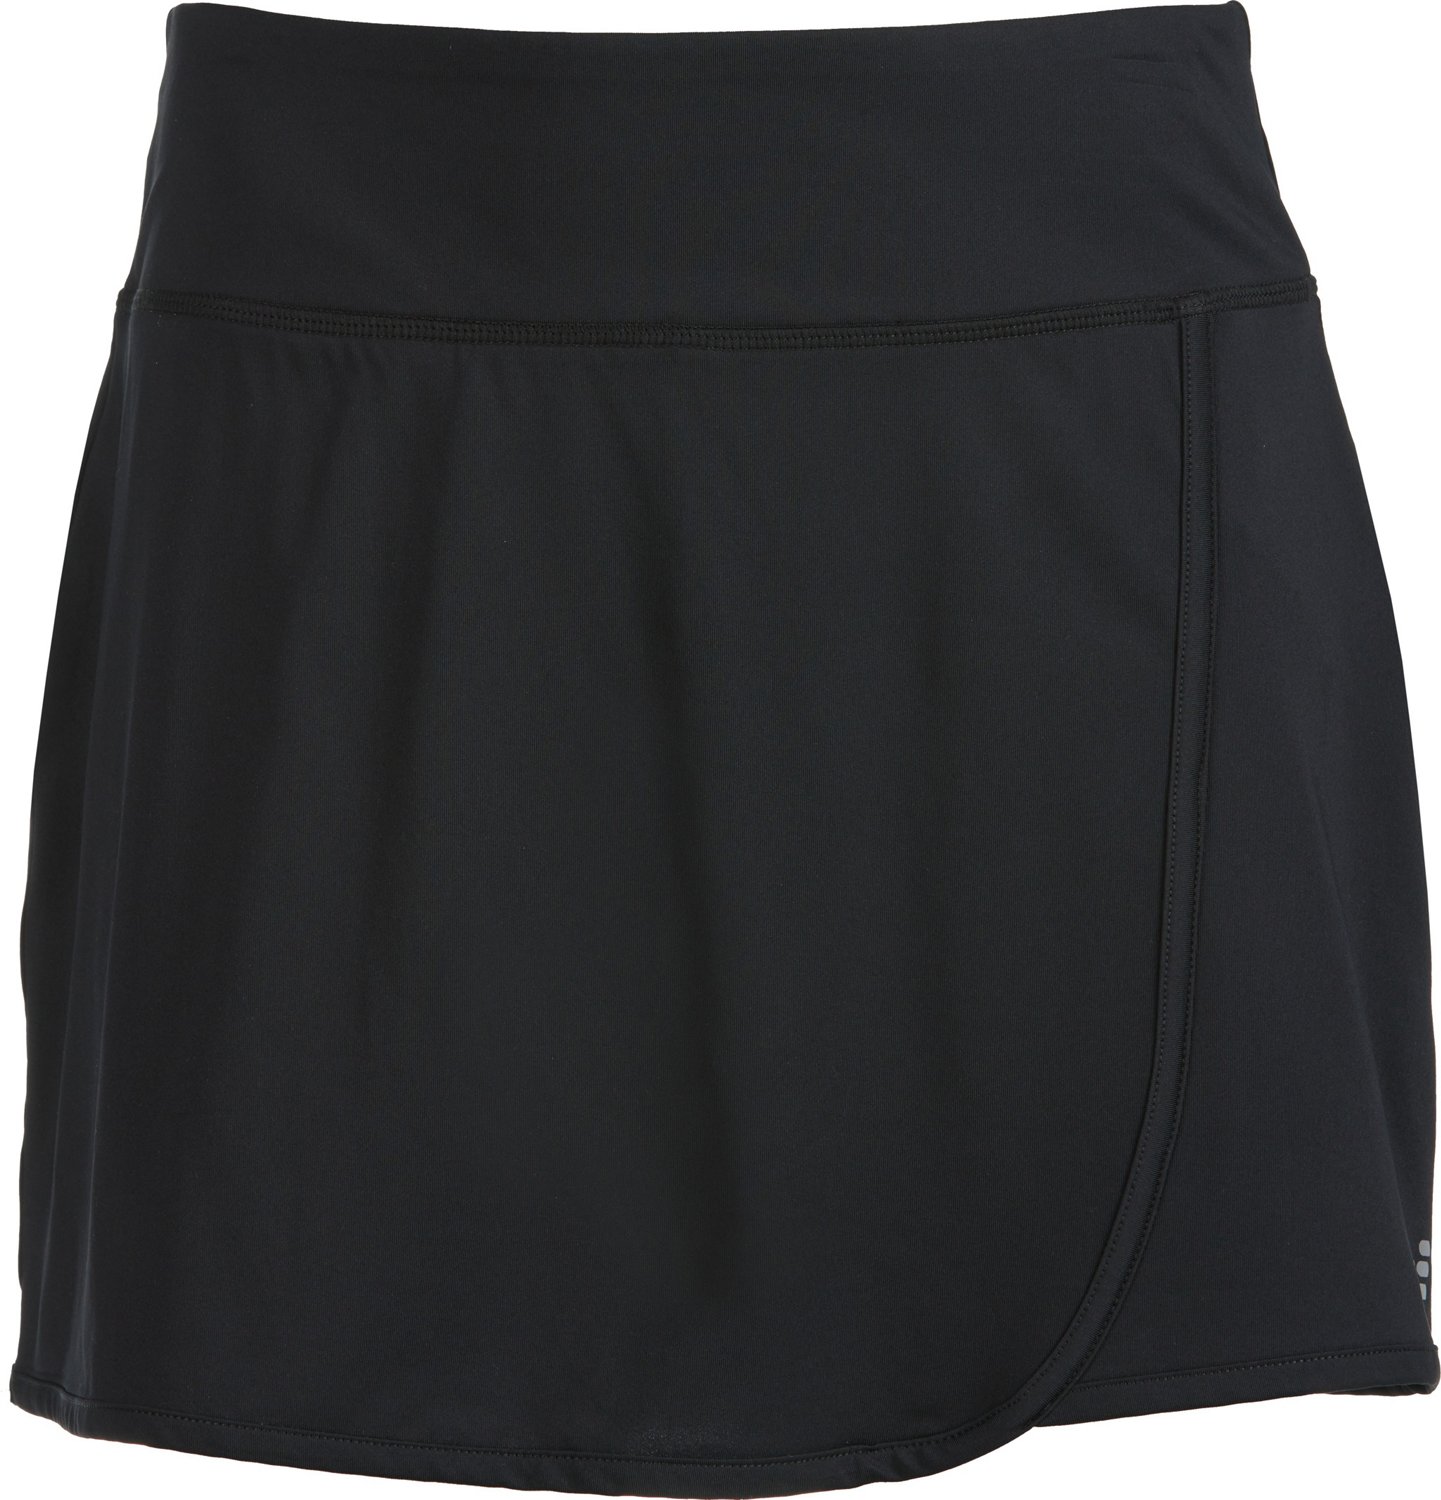 BCG Women's Taped Tennis Skort | Free Shipping at Academy